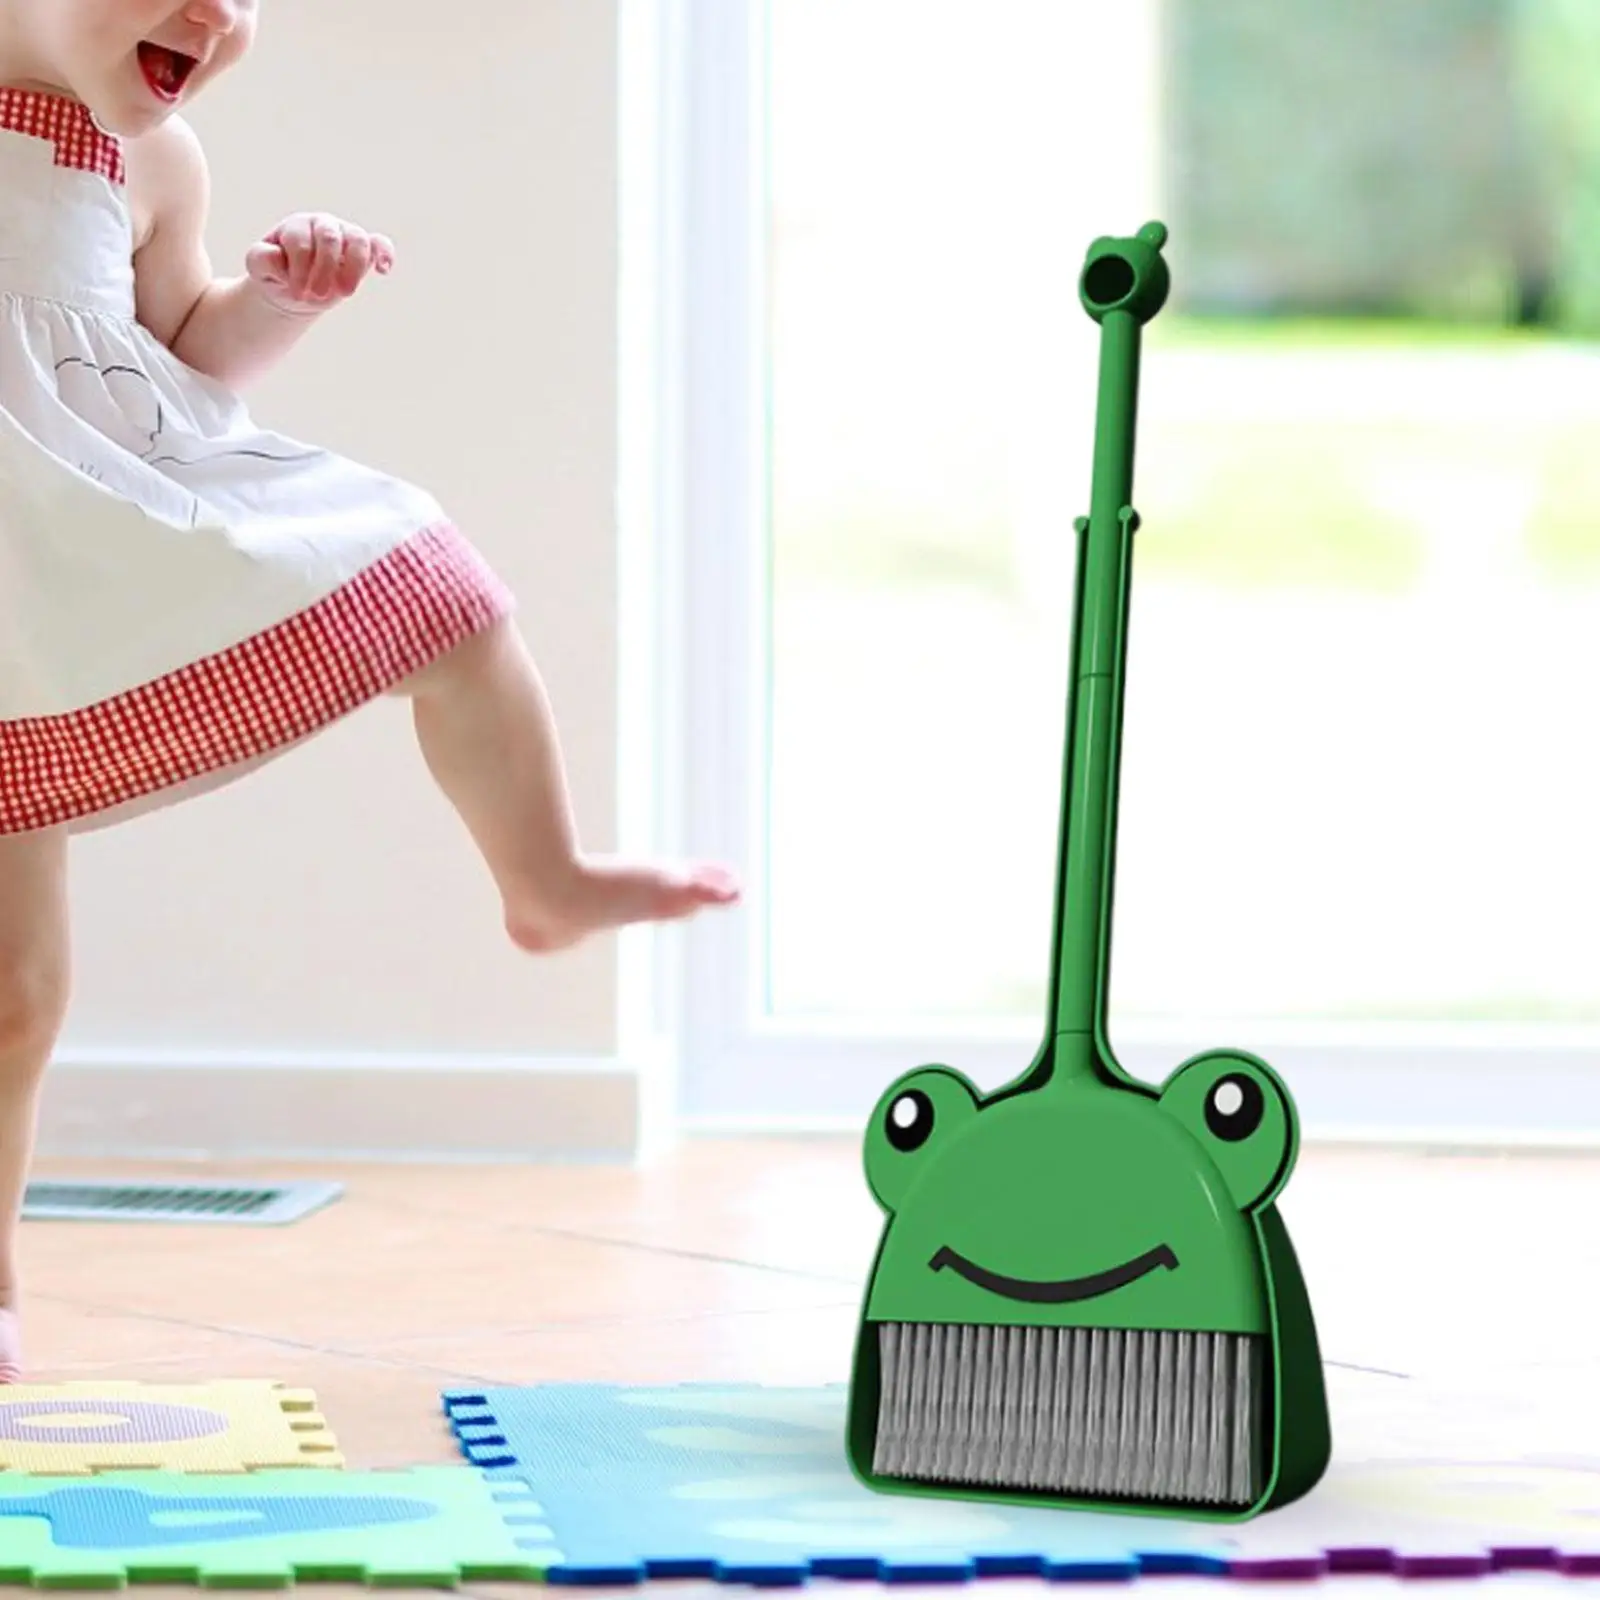 Mini Broom with Dustpan Role Playing Housekeeping Play Set Toddlers Cleaning Toys Set for Kindergarten Preschool Boys Girls